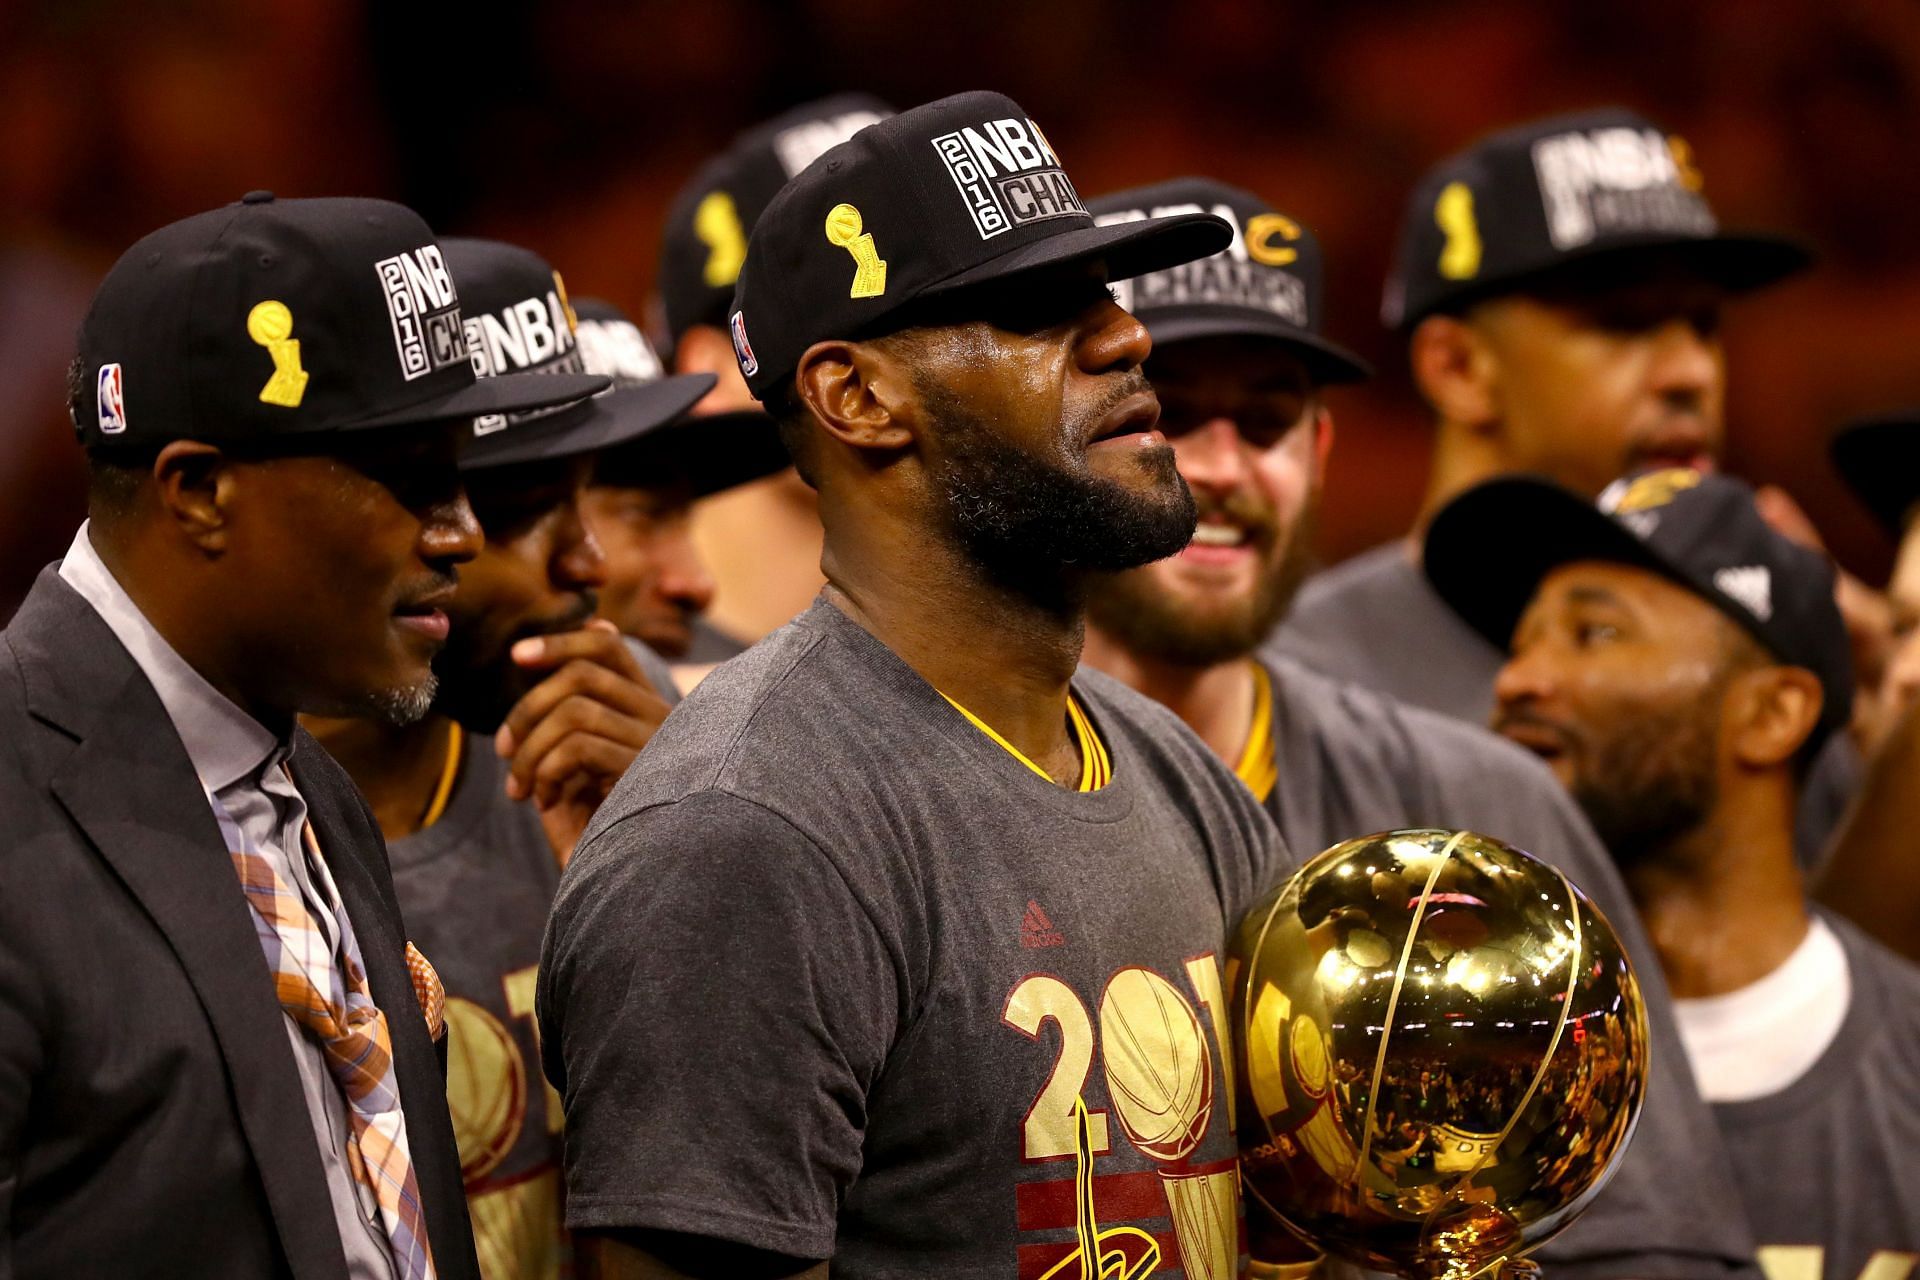 James with the championship trophy after the 2016 NBA Finals.